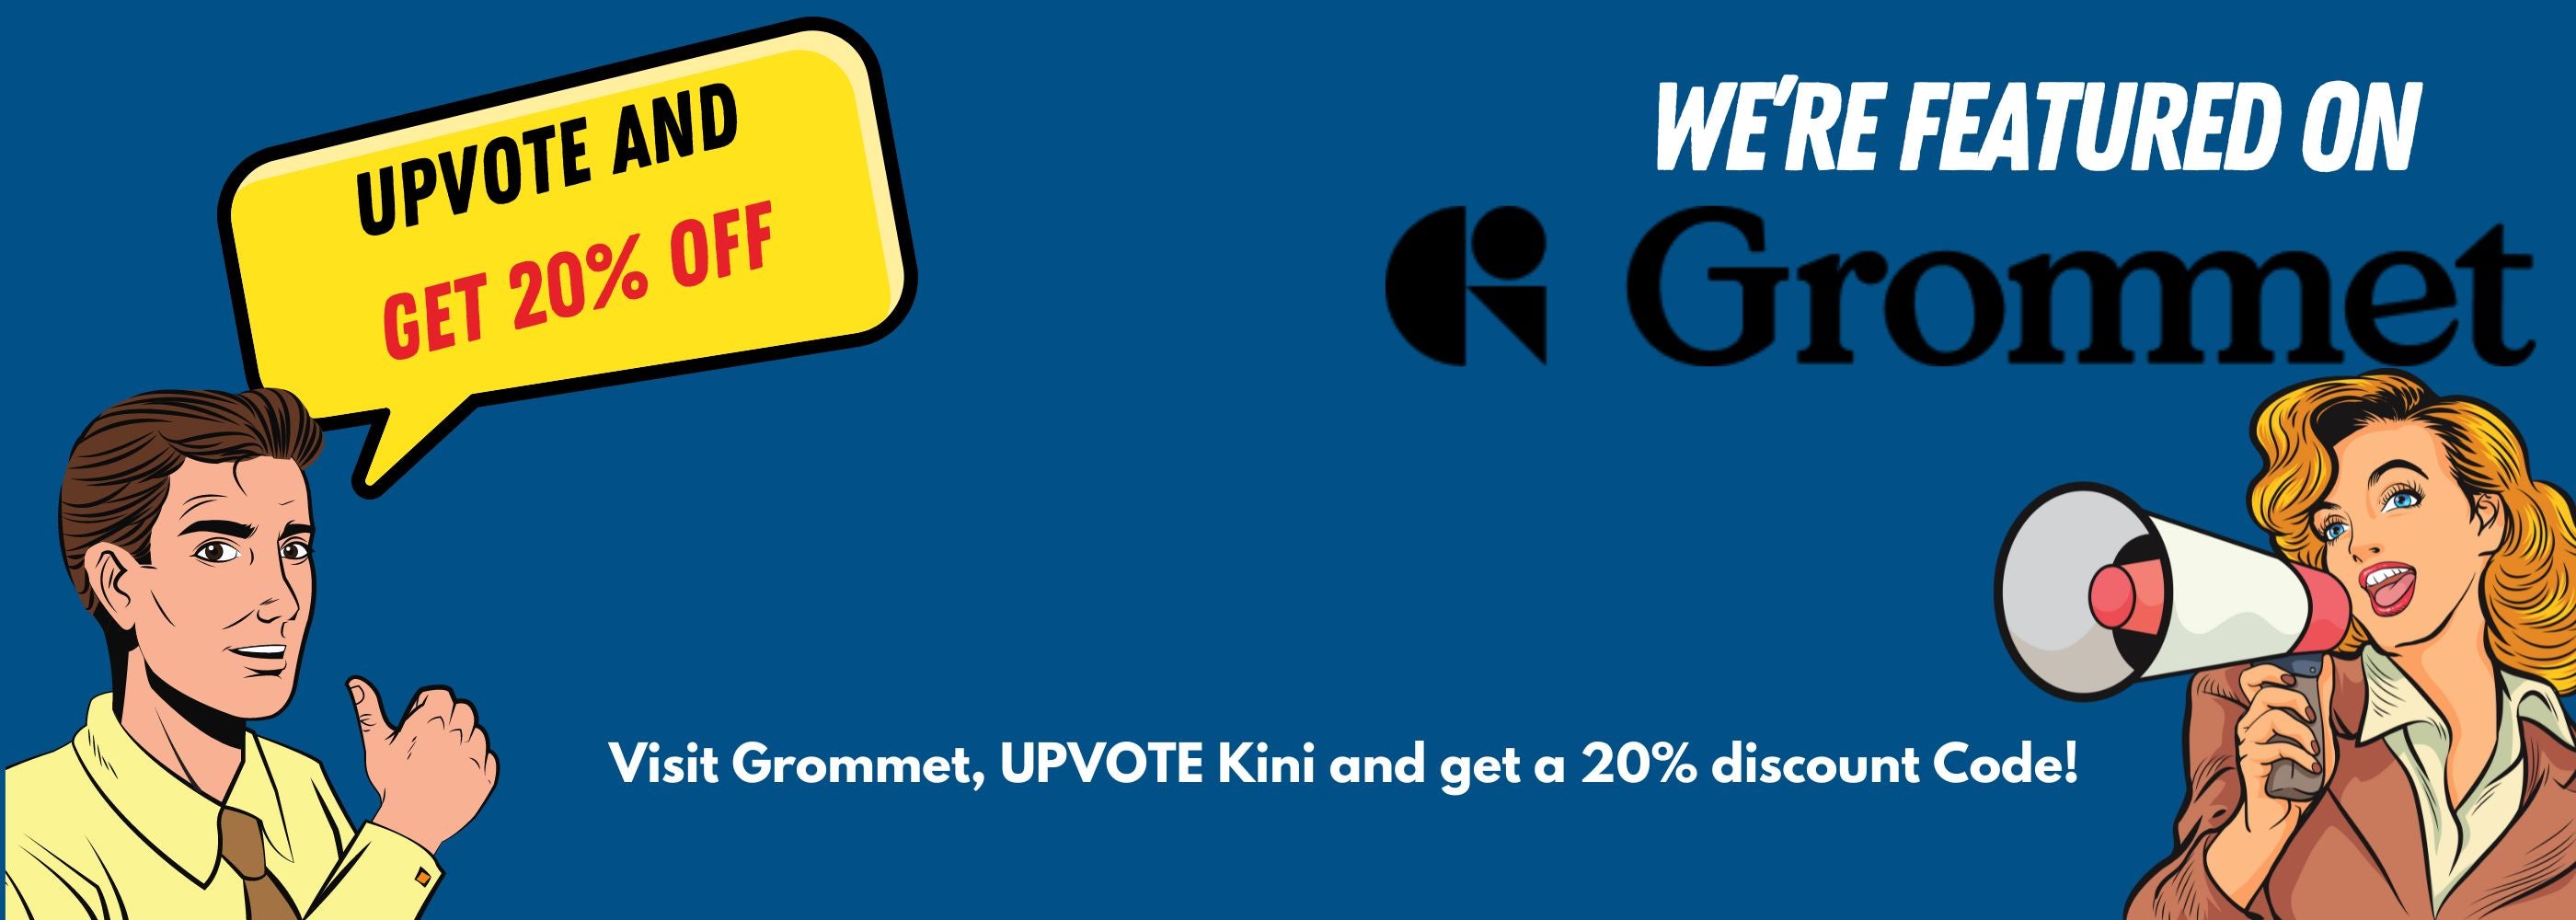 Announcement of Kini featured on Grommet. Upvote Kini and get 20% off everything.